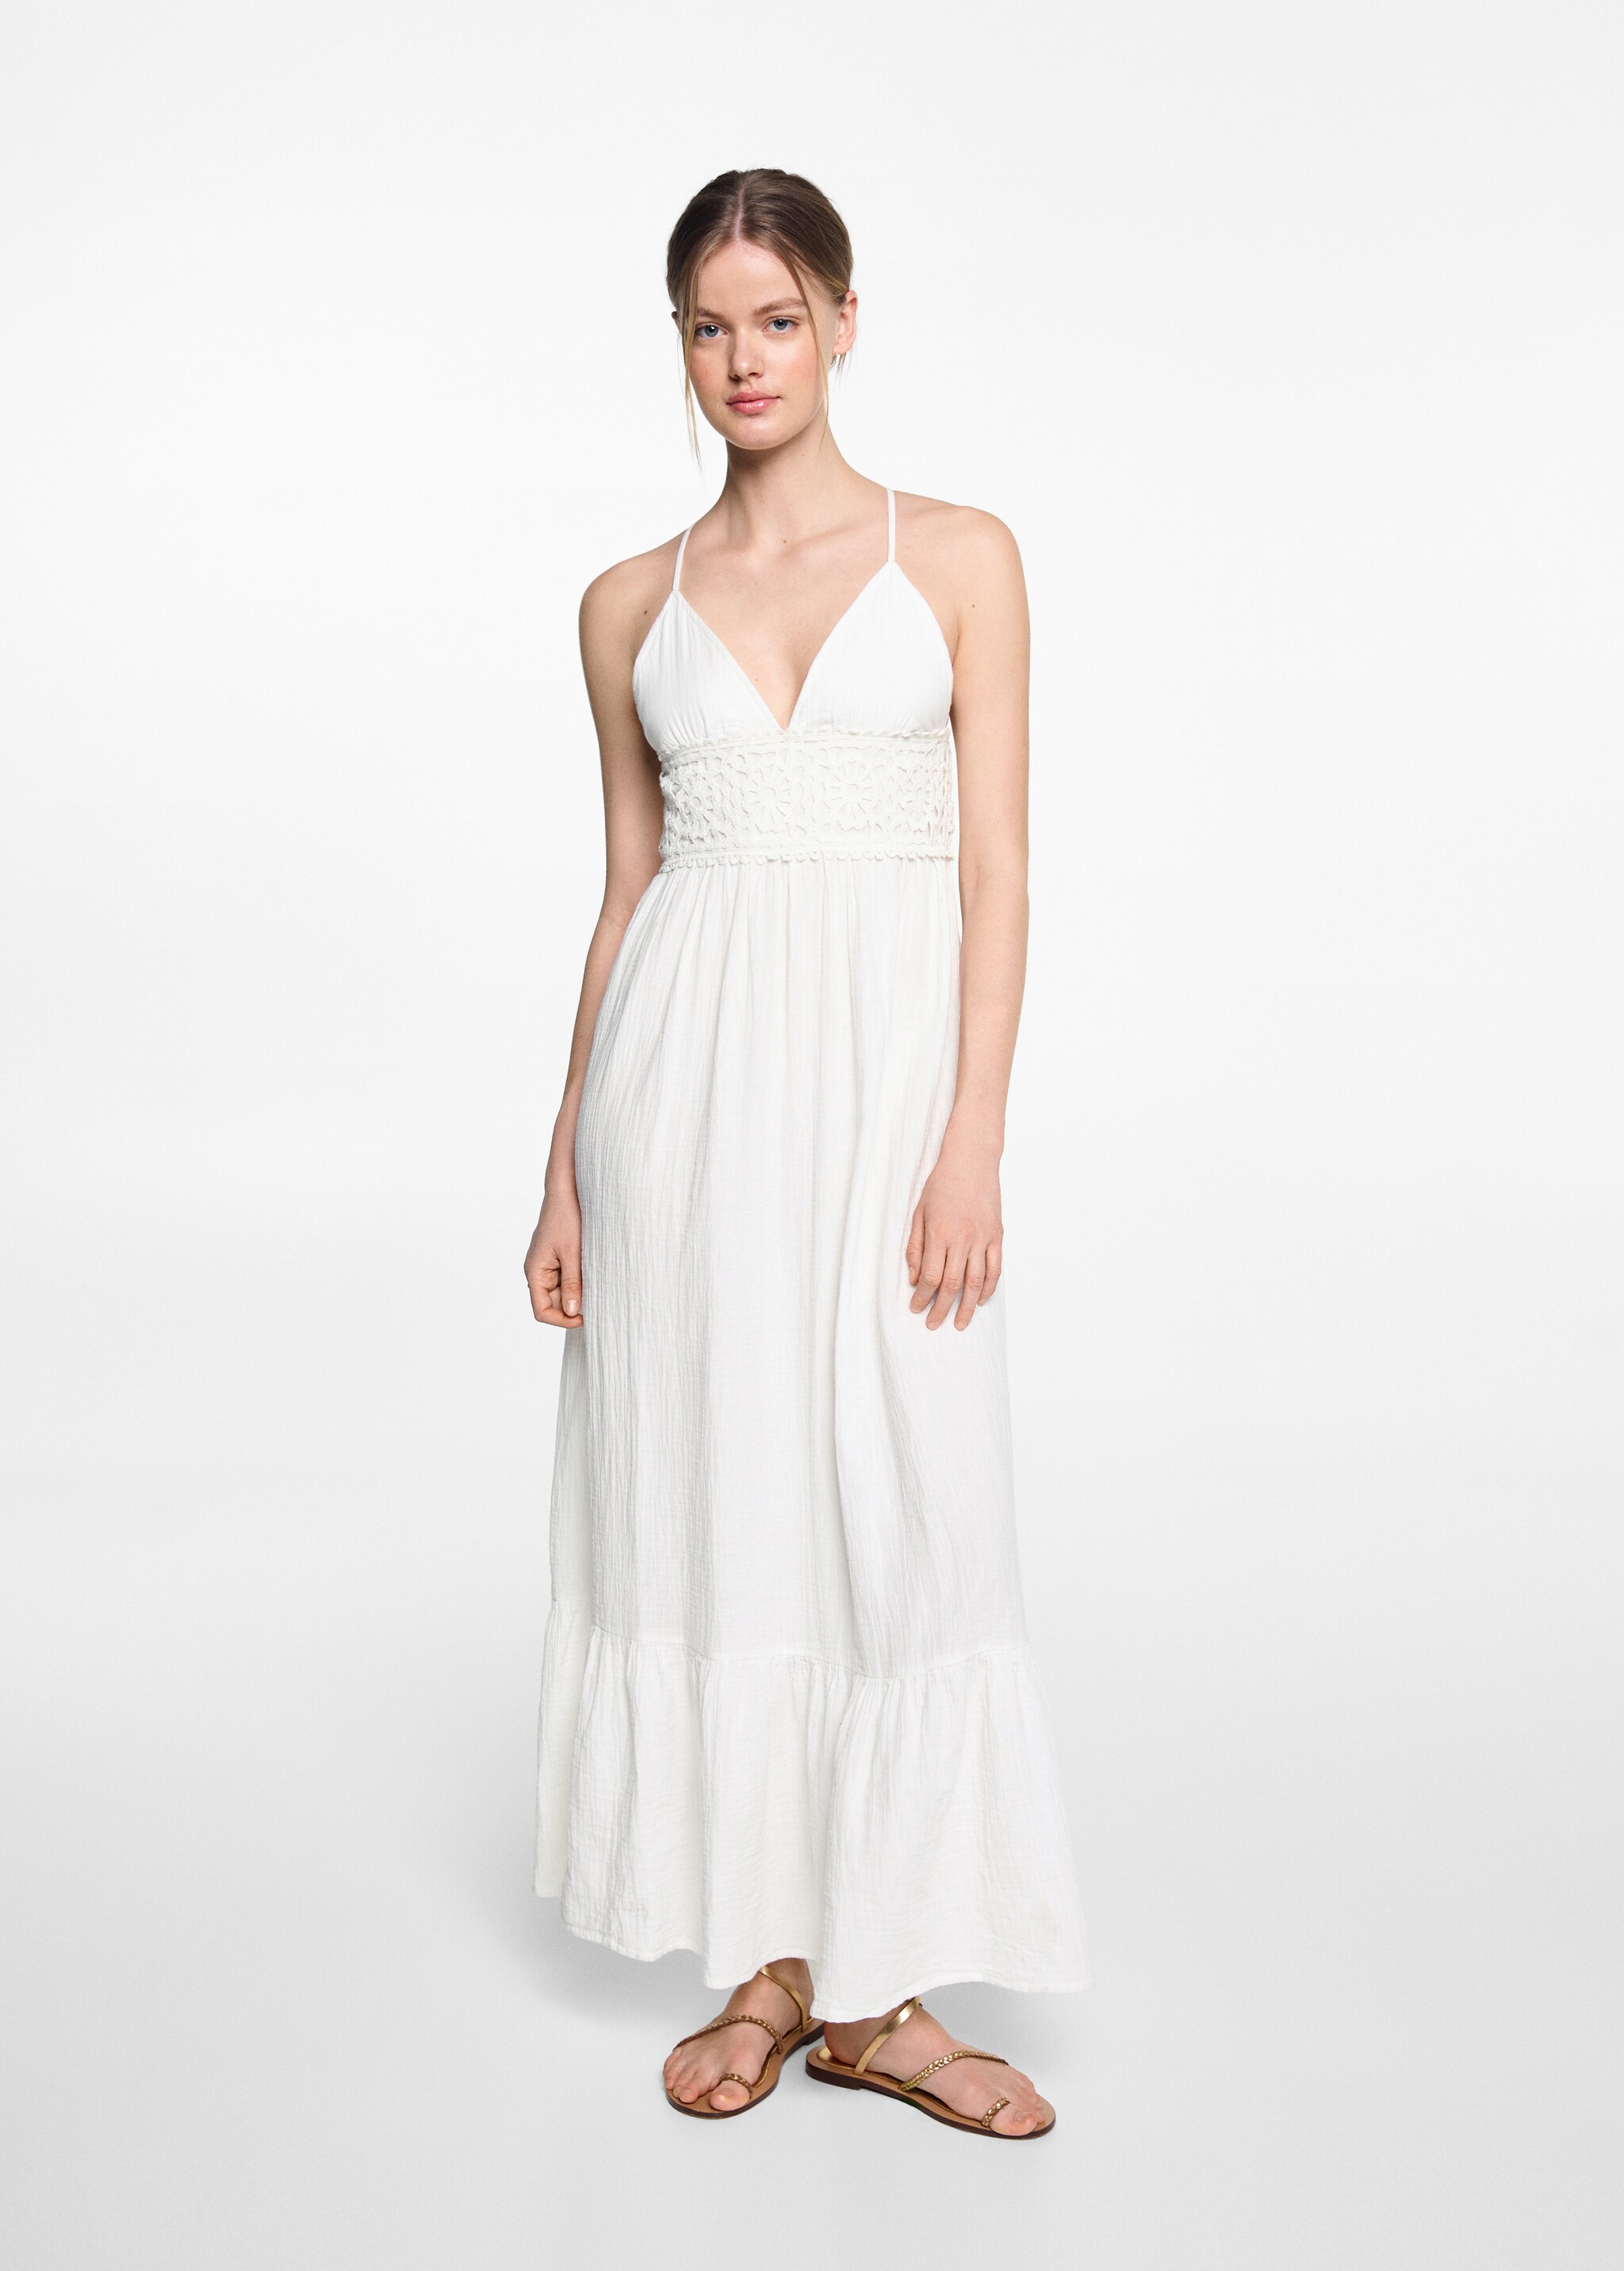 Ruffle embroidered maxi-dress - General plane